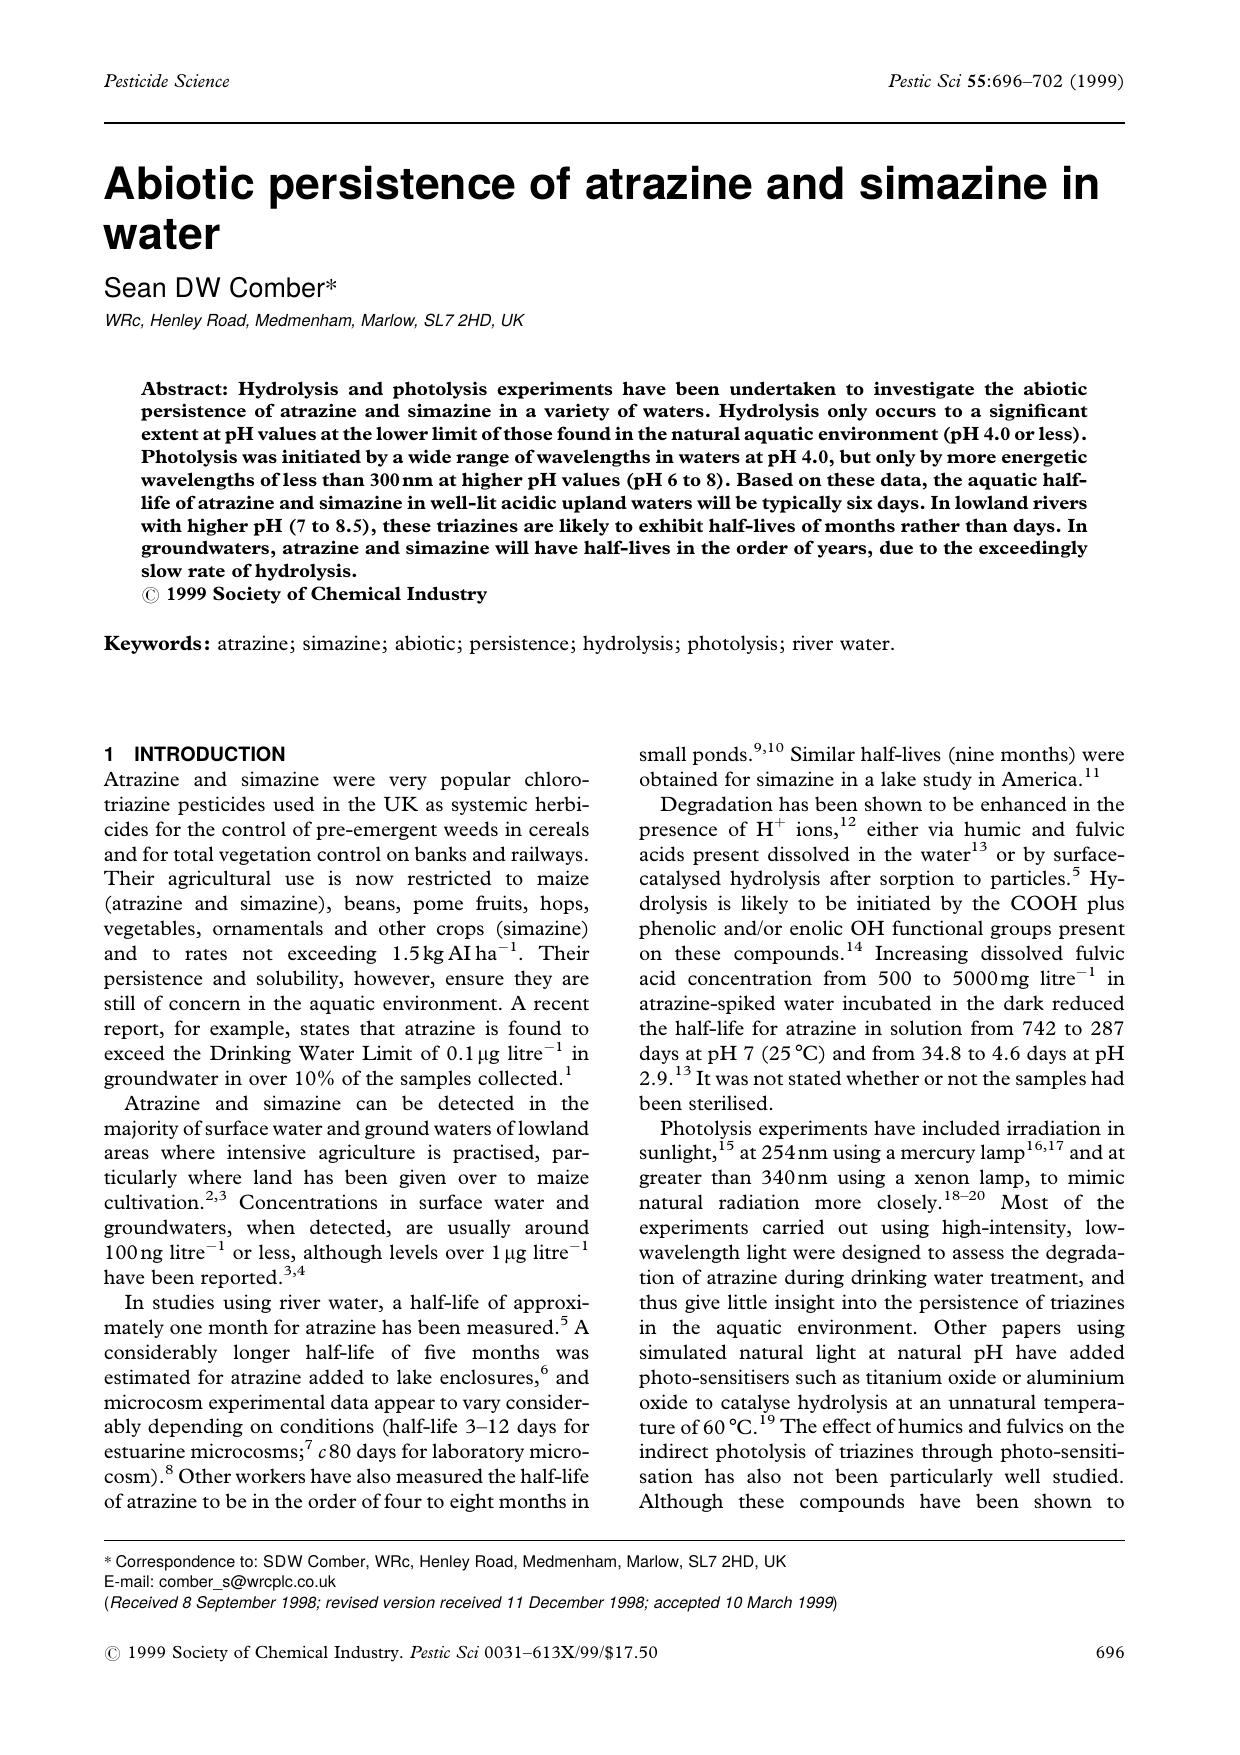 Abiotic persistence of atrazine and simazine in water by Unknown